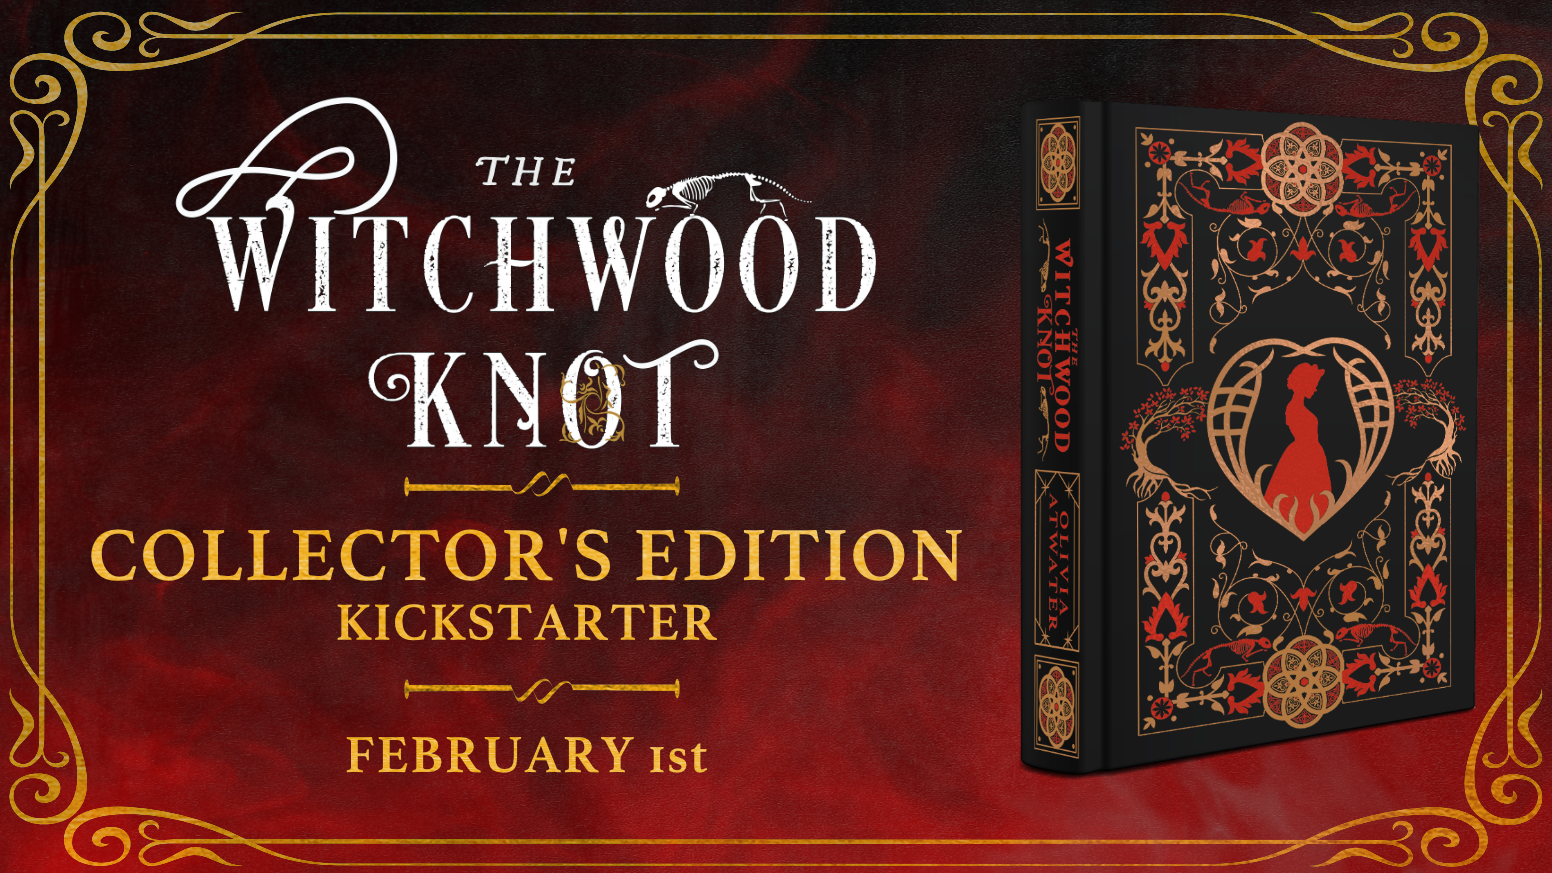 The Witchwood Knot Collector's Edition Kickstarter